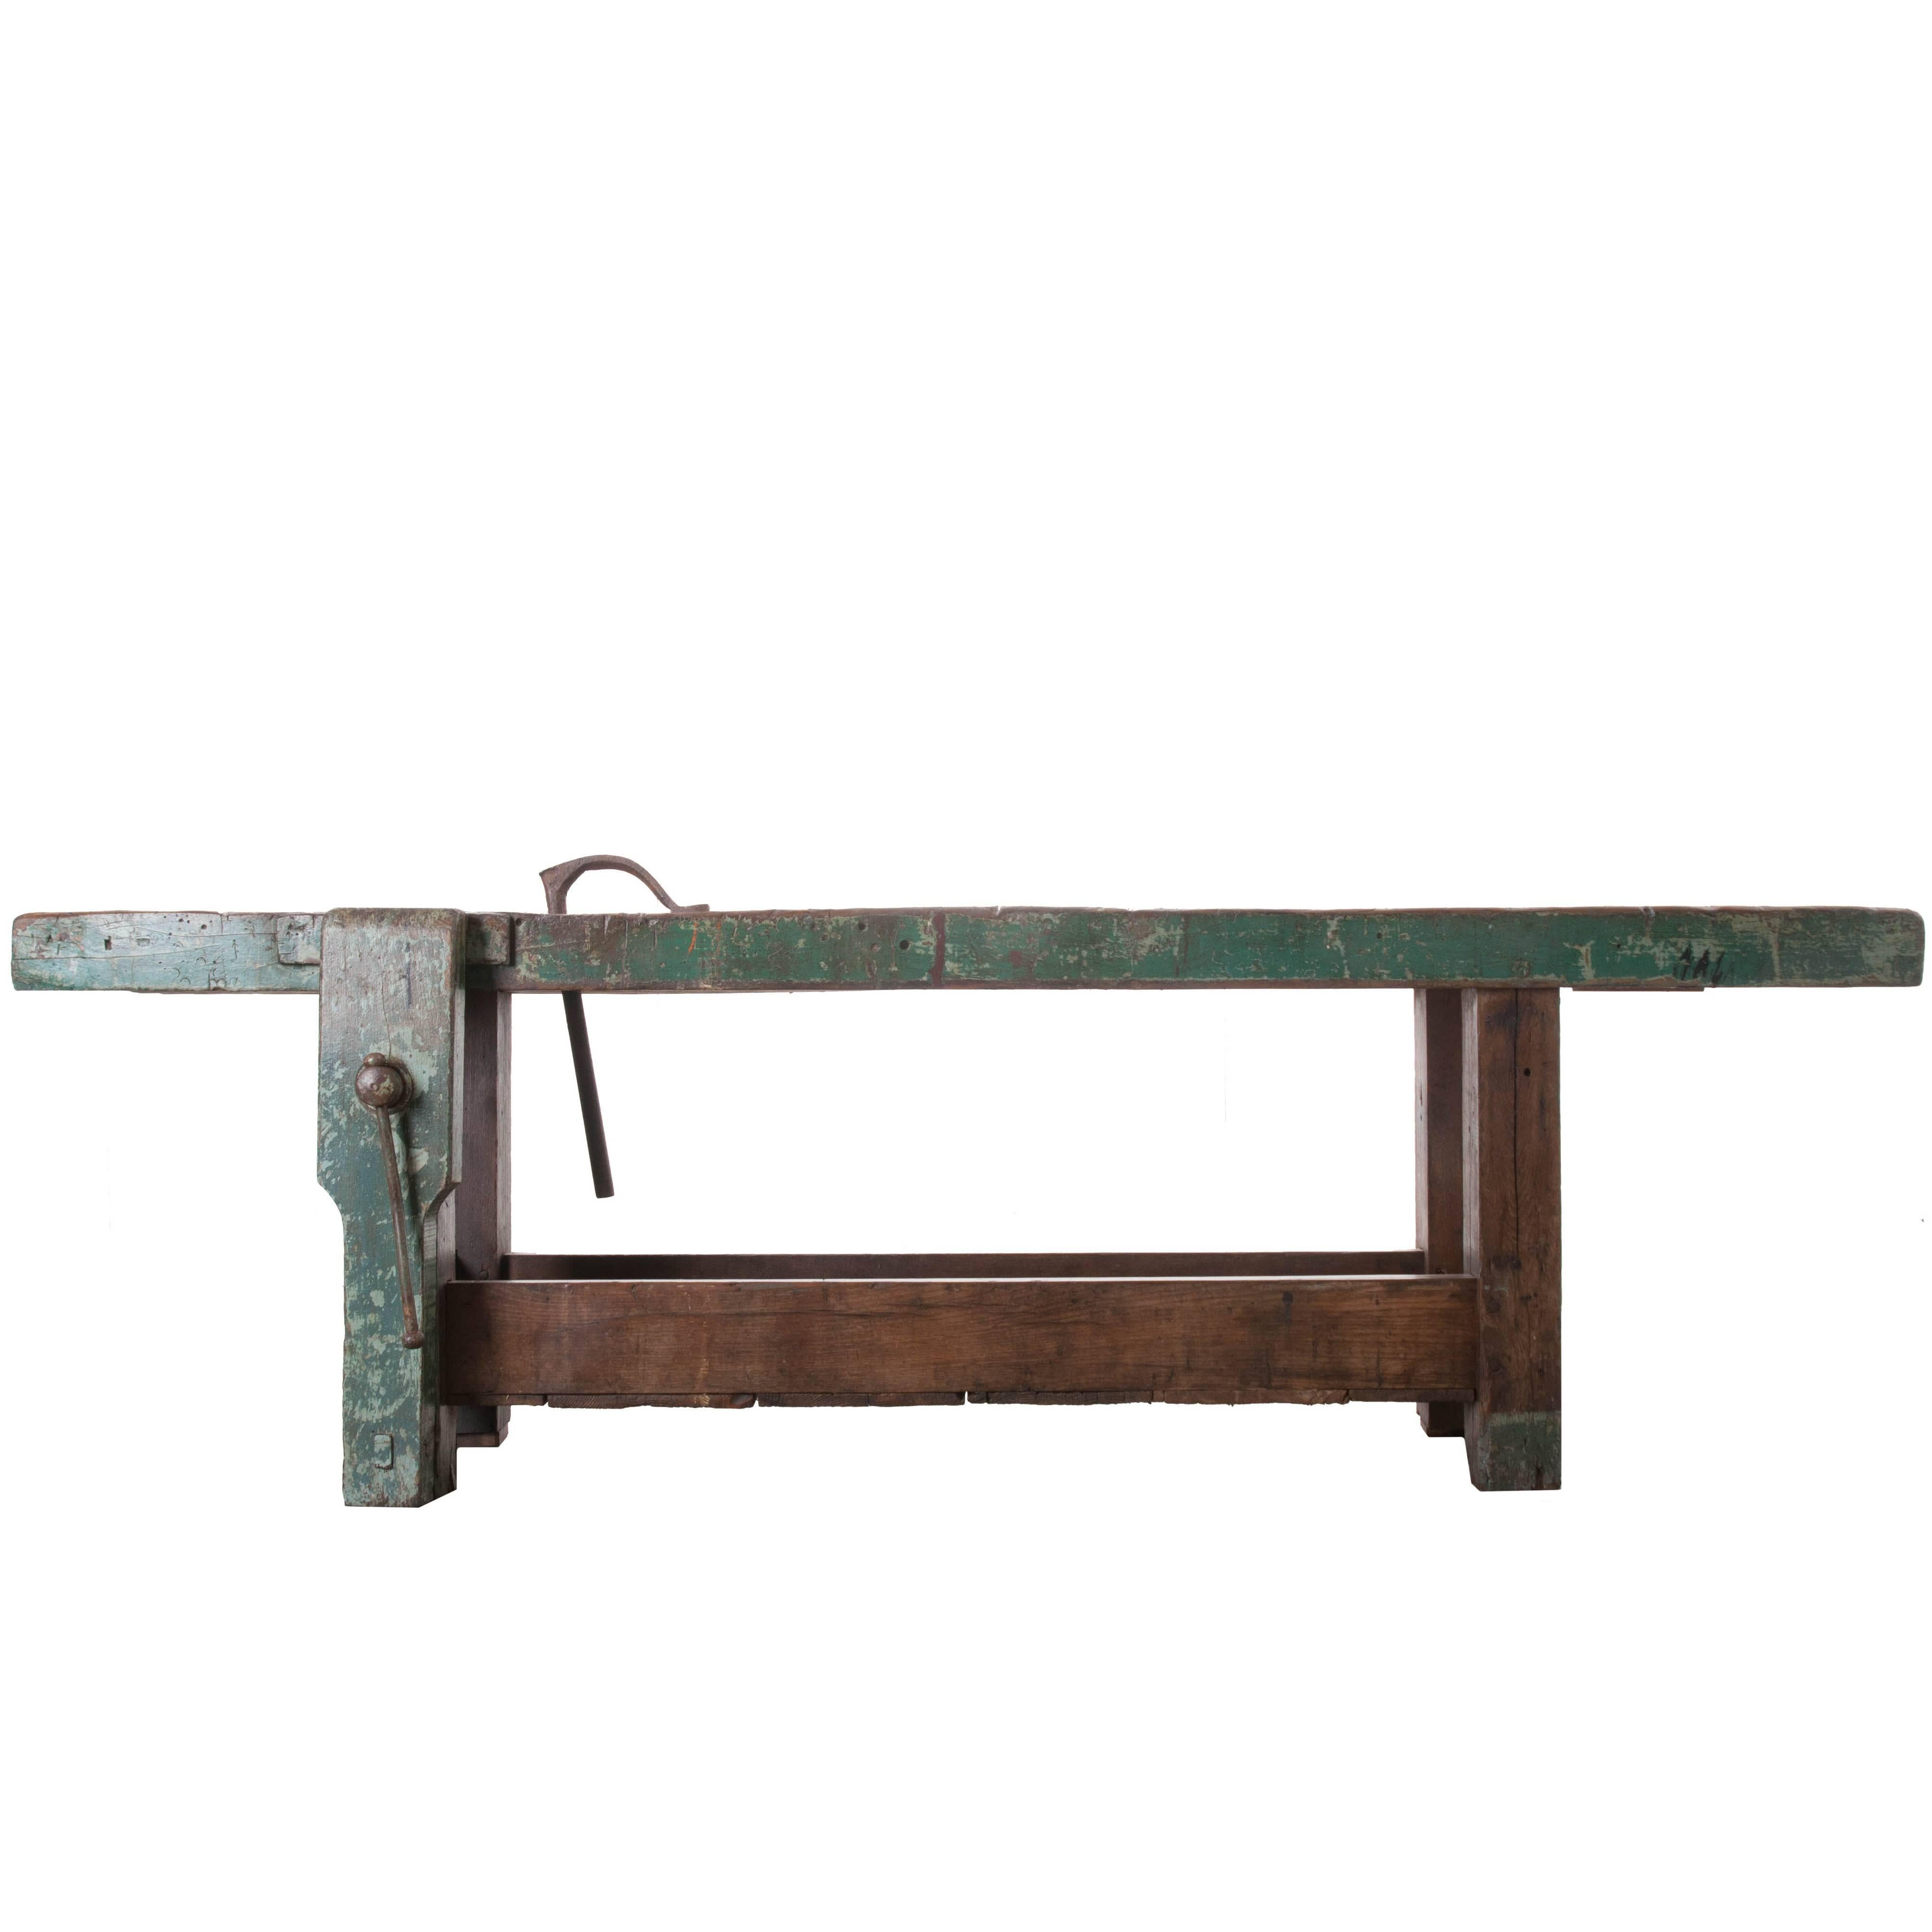 English 19th Century Painted Work Bench